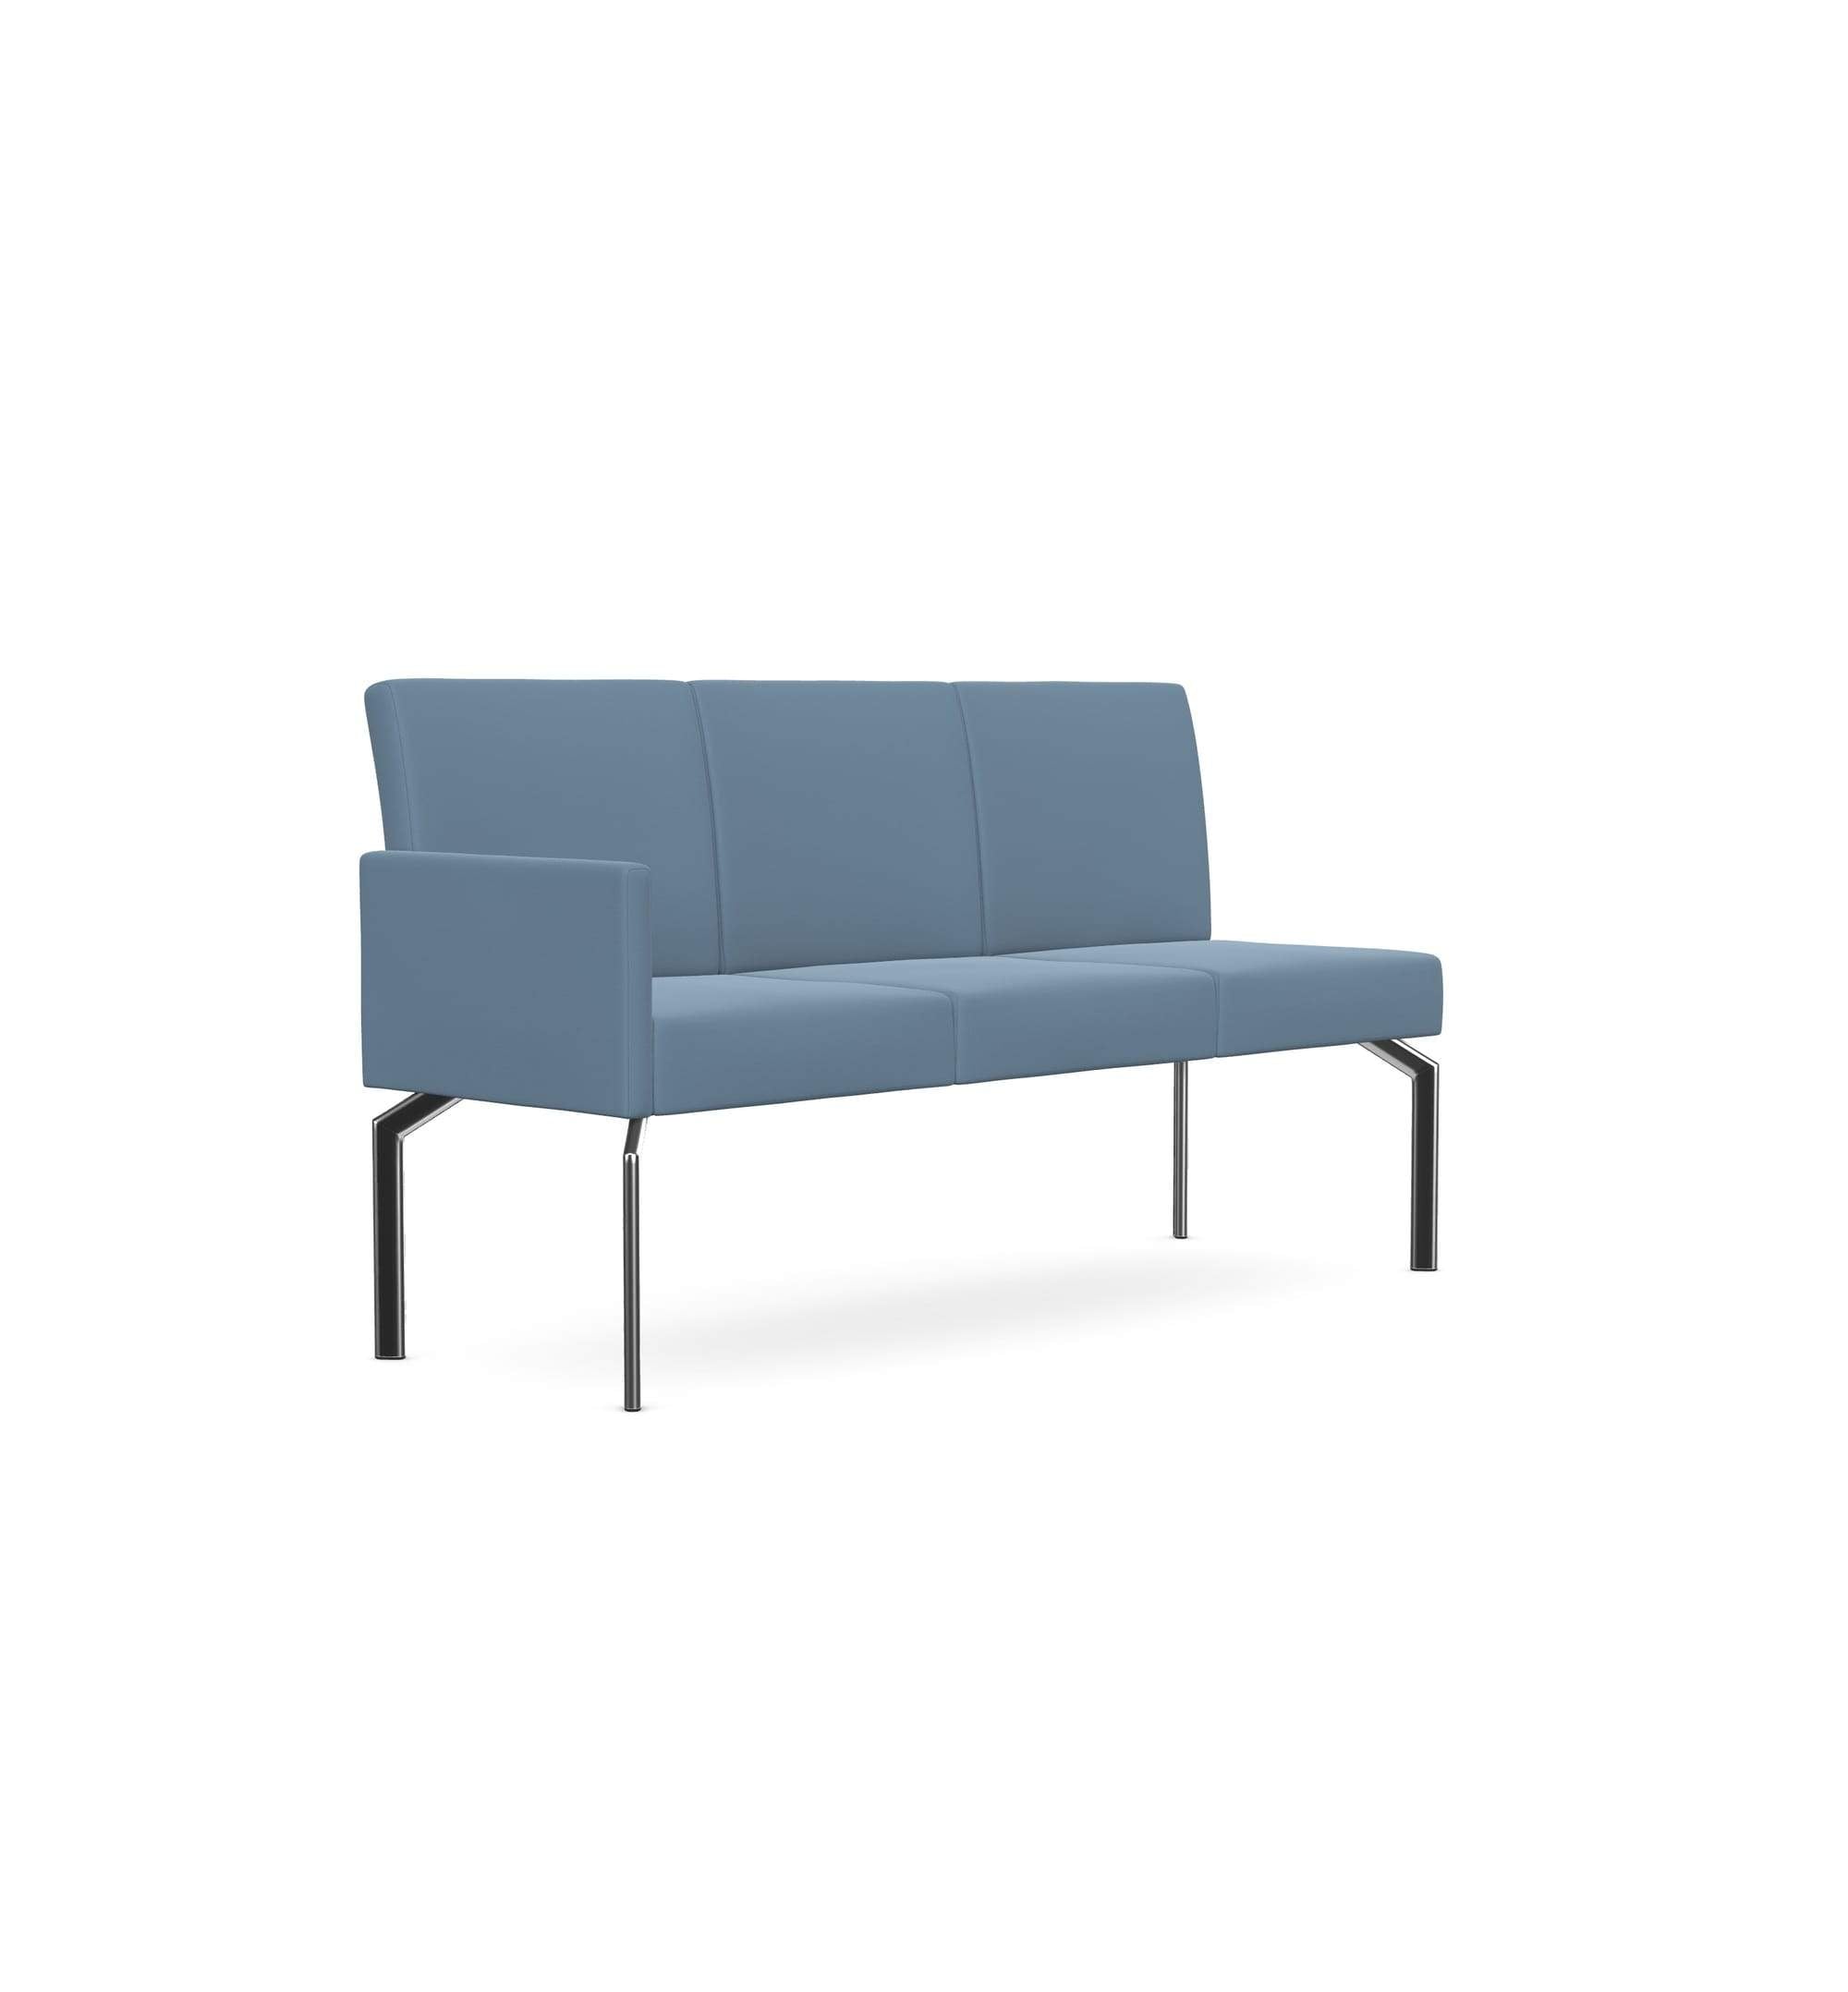 Cloud - 3 Seater with Backrest without Left Armrest